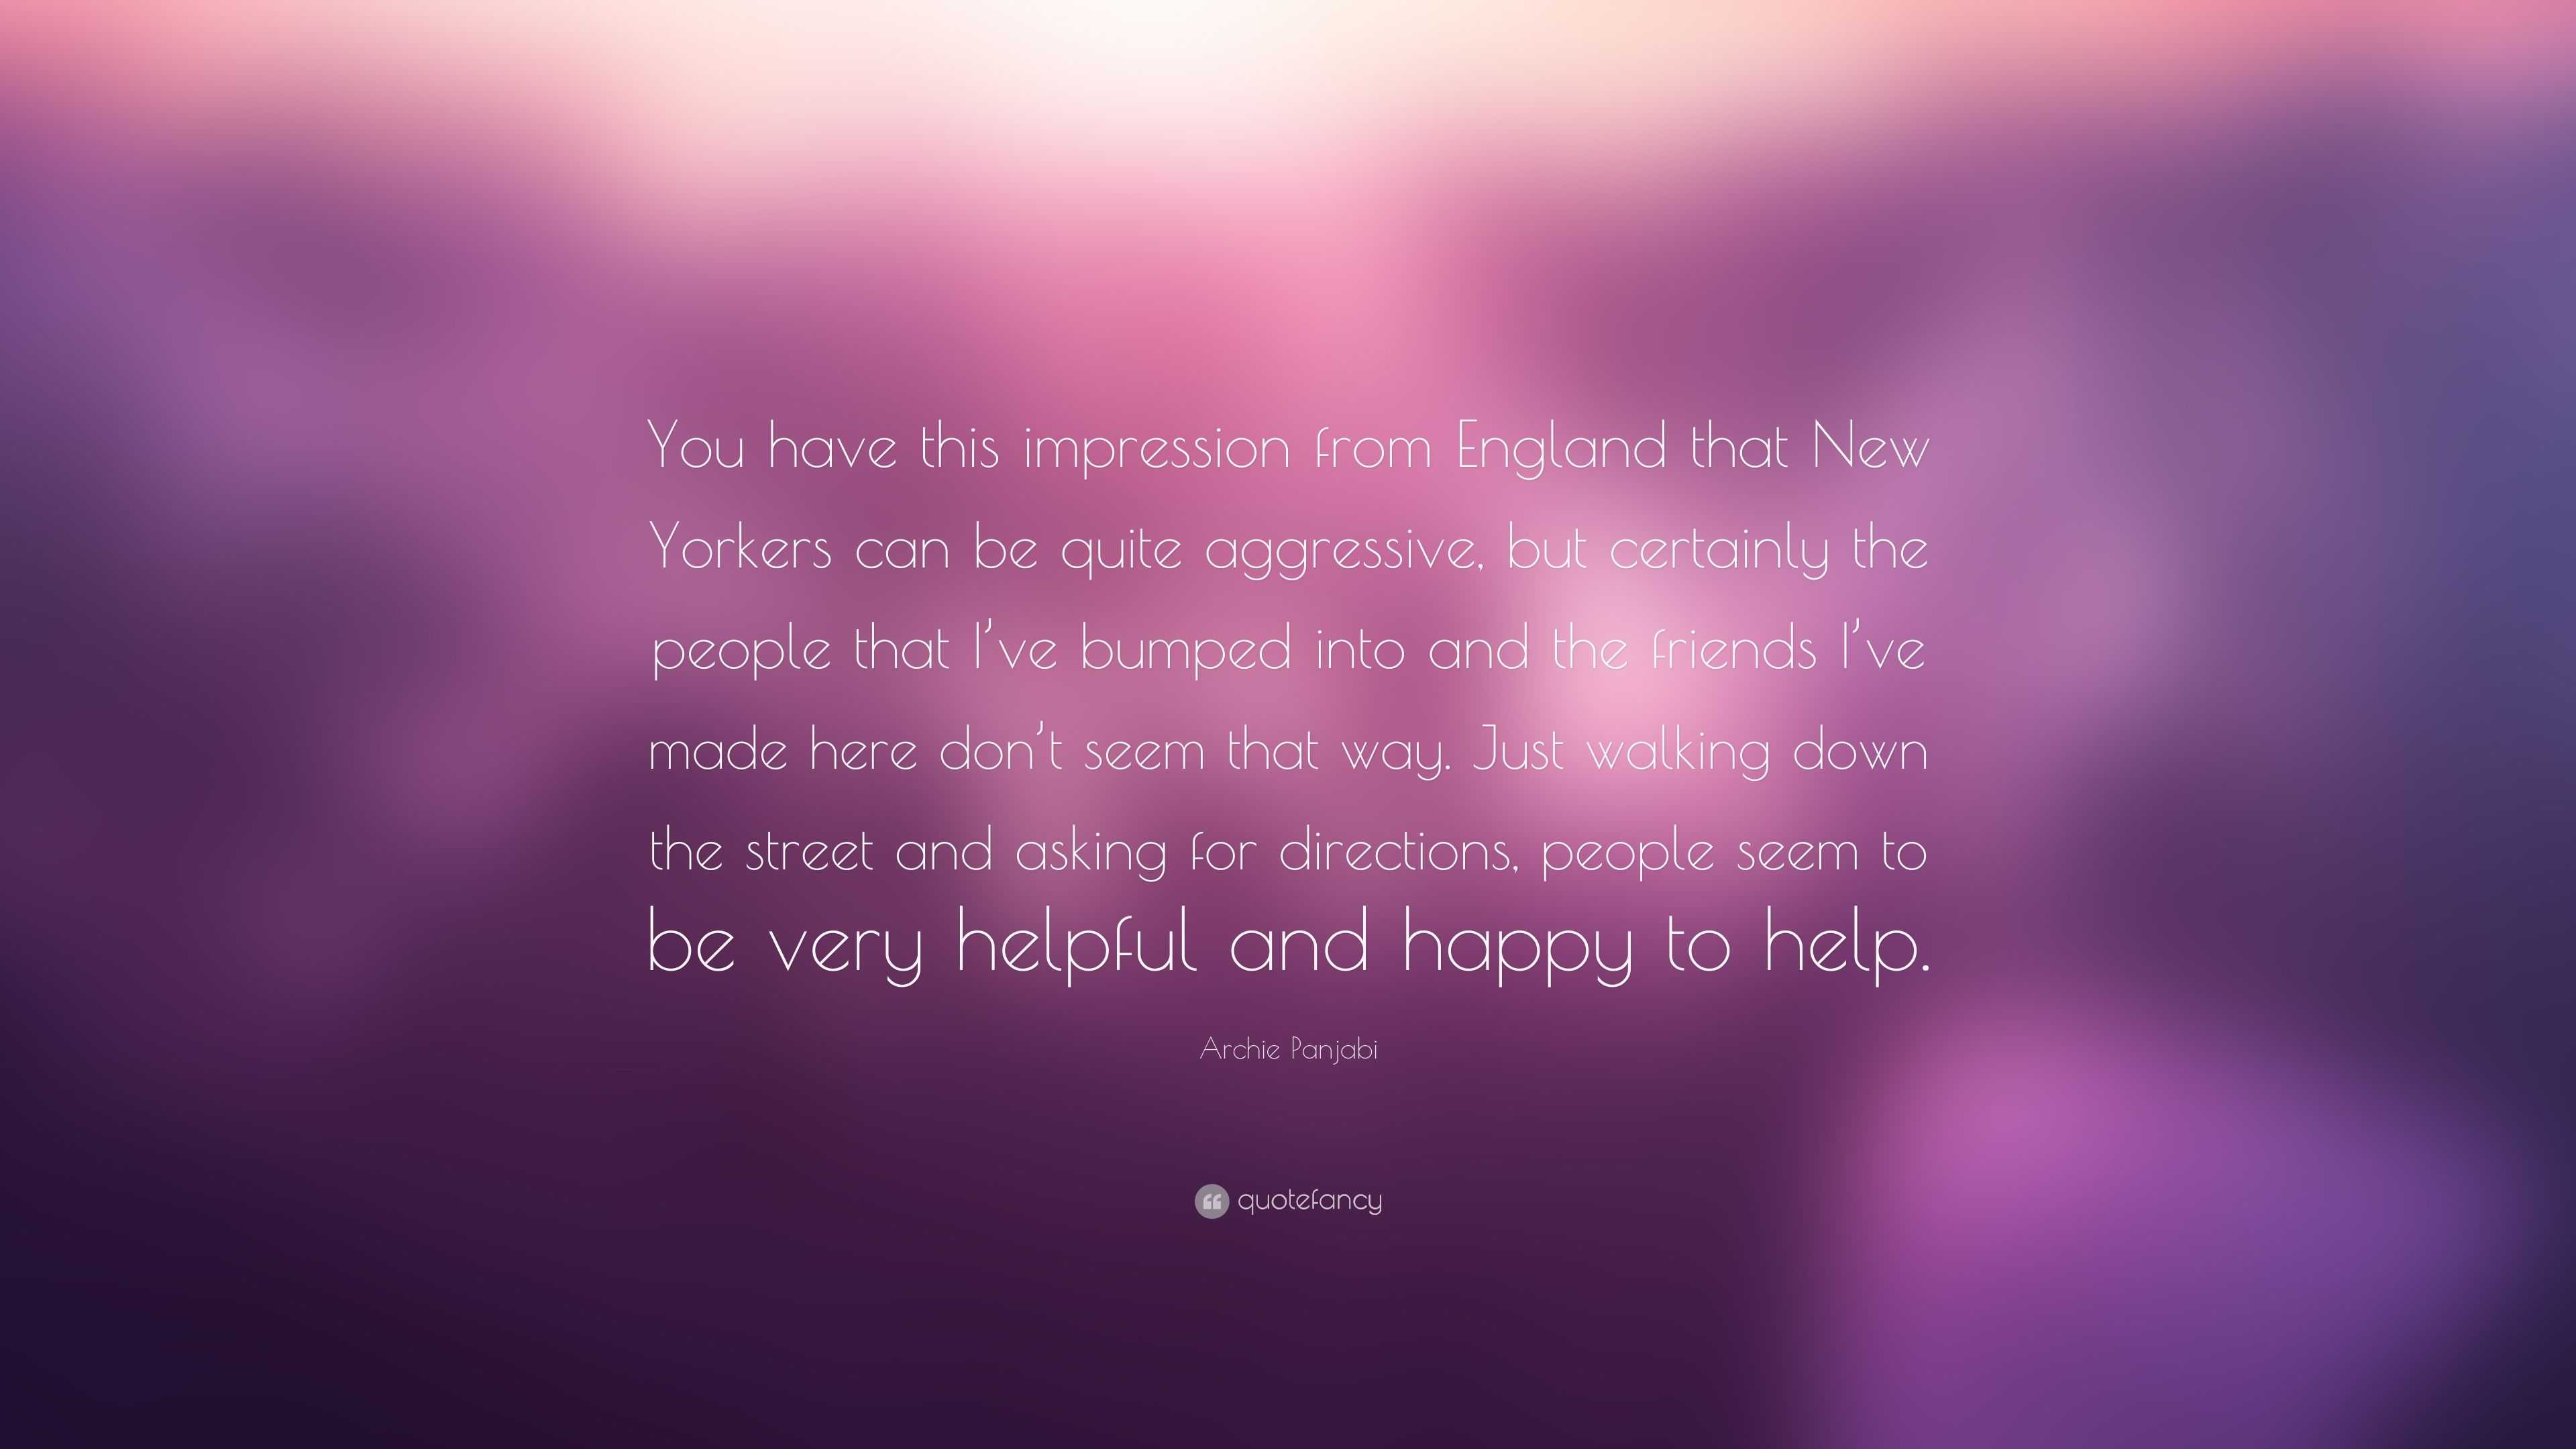 Archie Panjabi Quote: “You have this impression from England that New ...